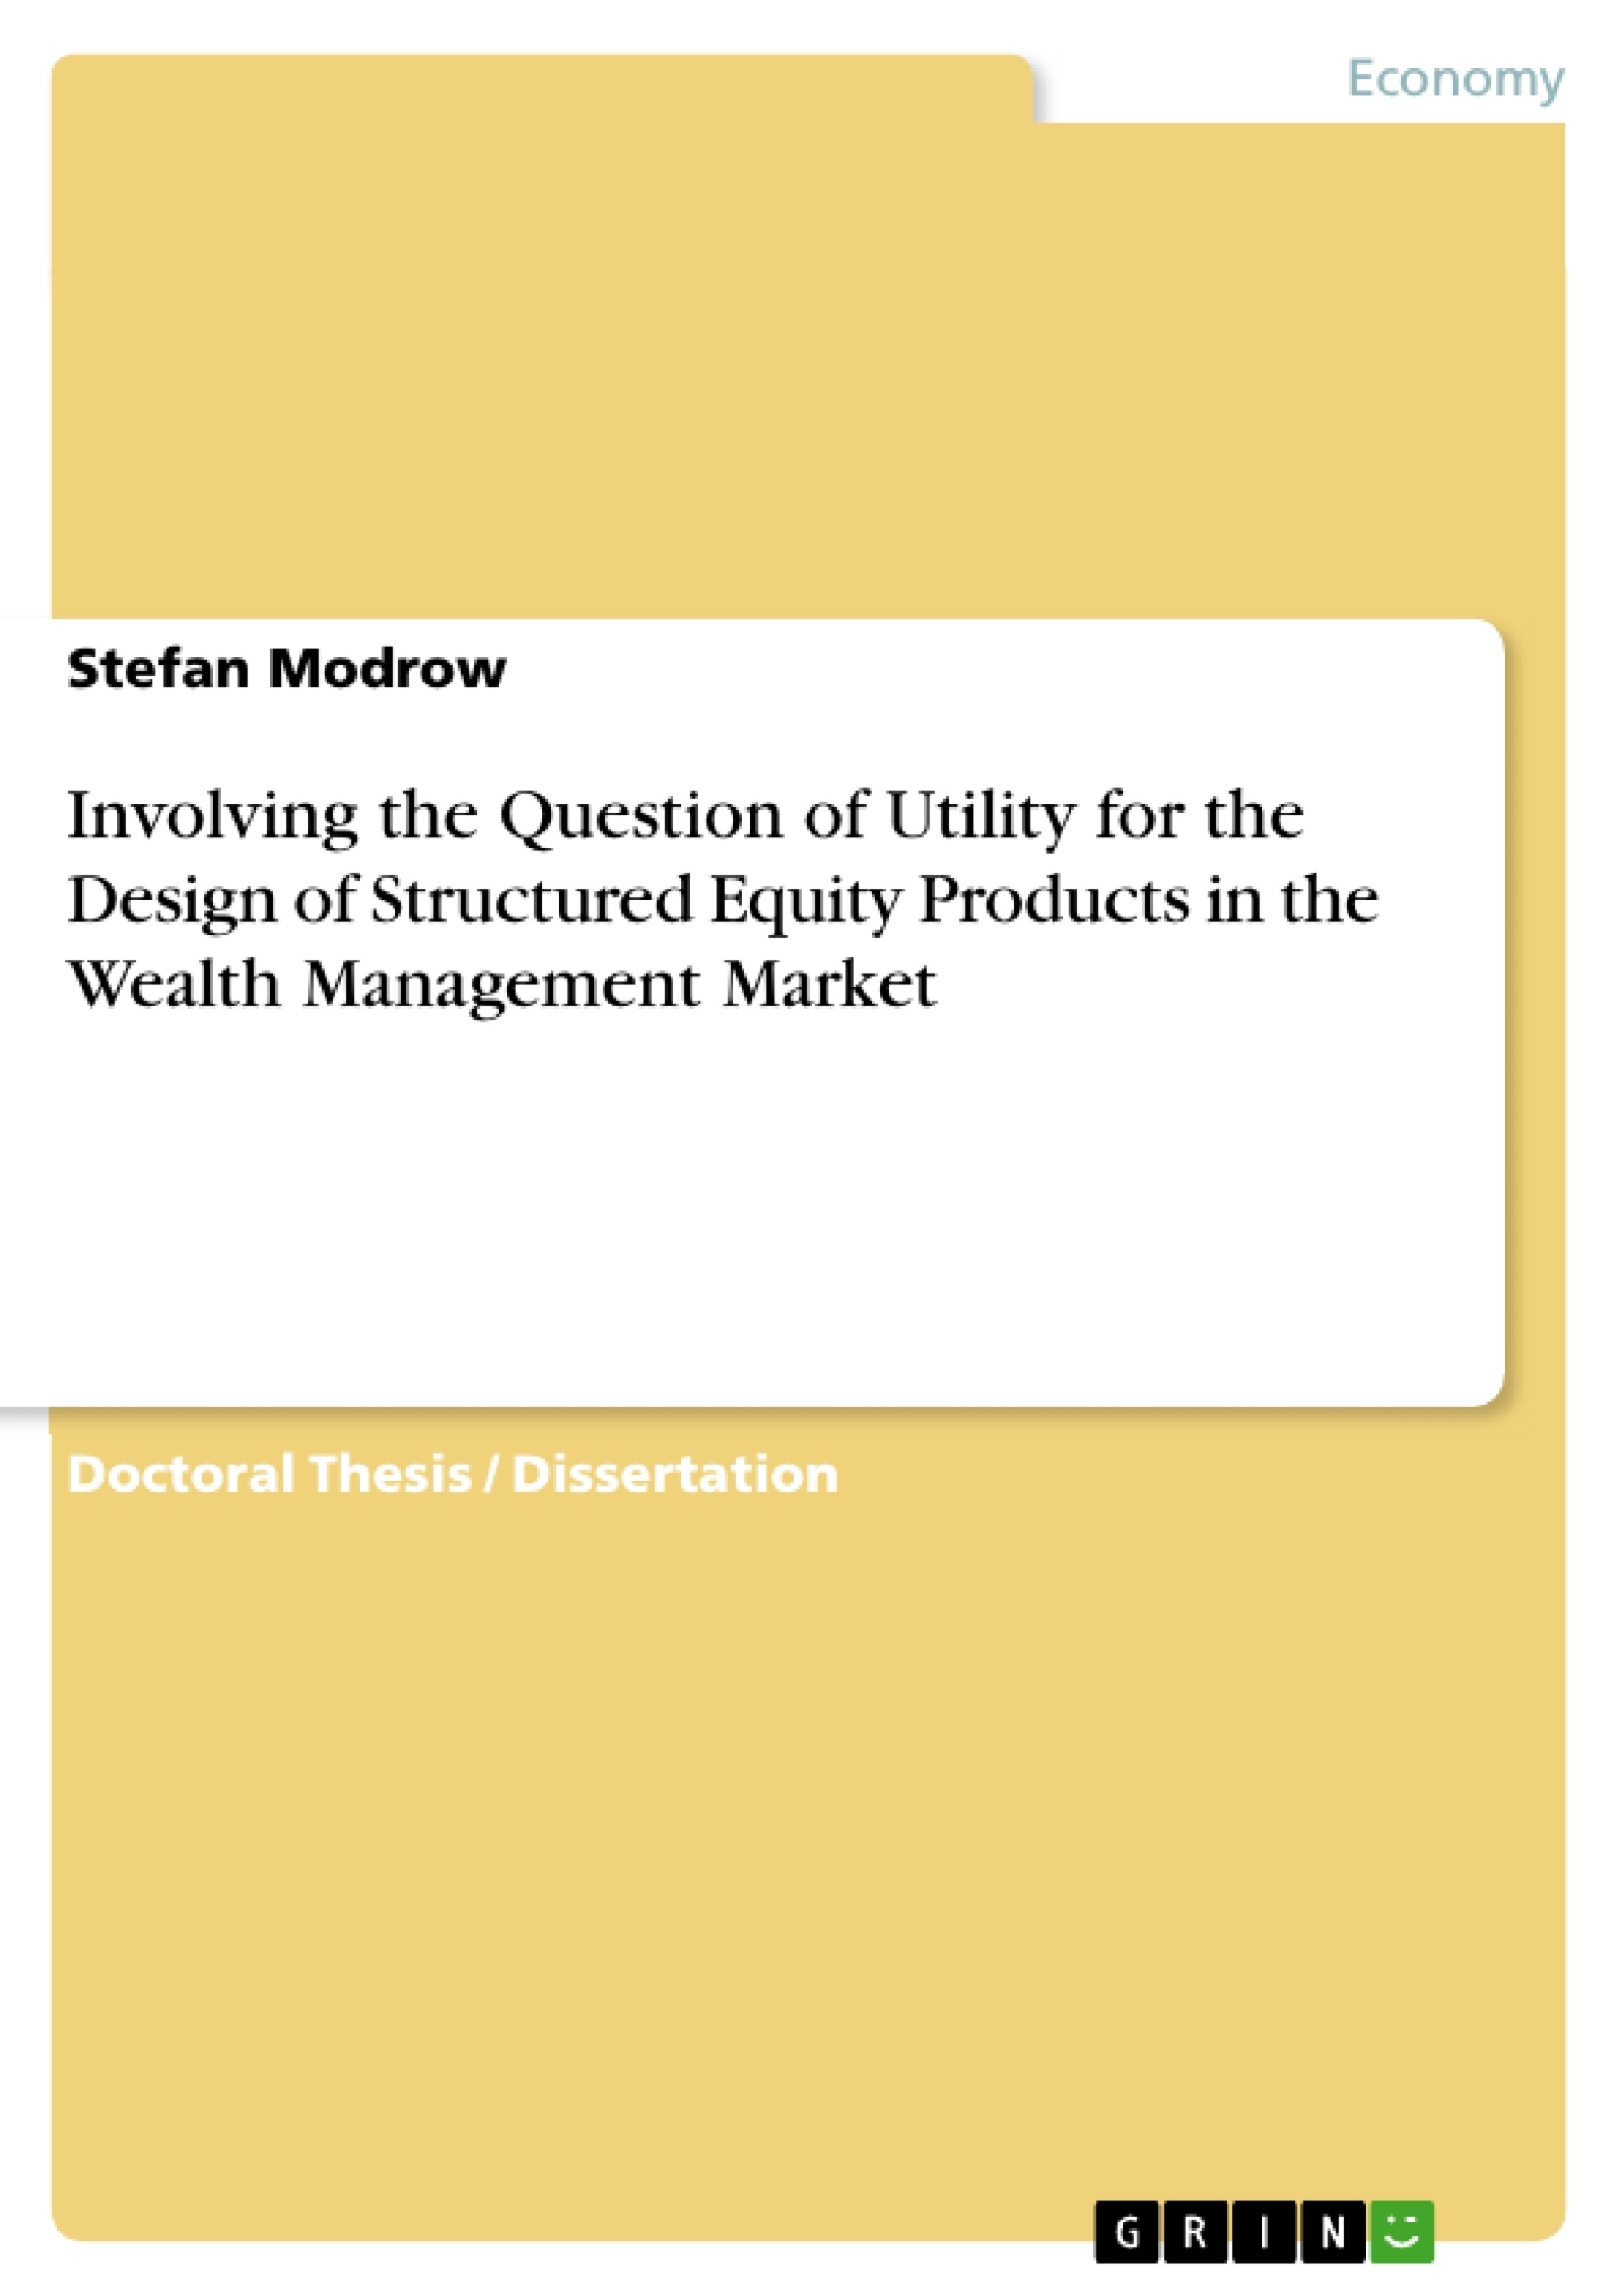 Titre: Involving the Question of Utility for the Design of Structured Equity Products in the Wealth Management Market